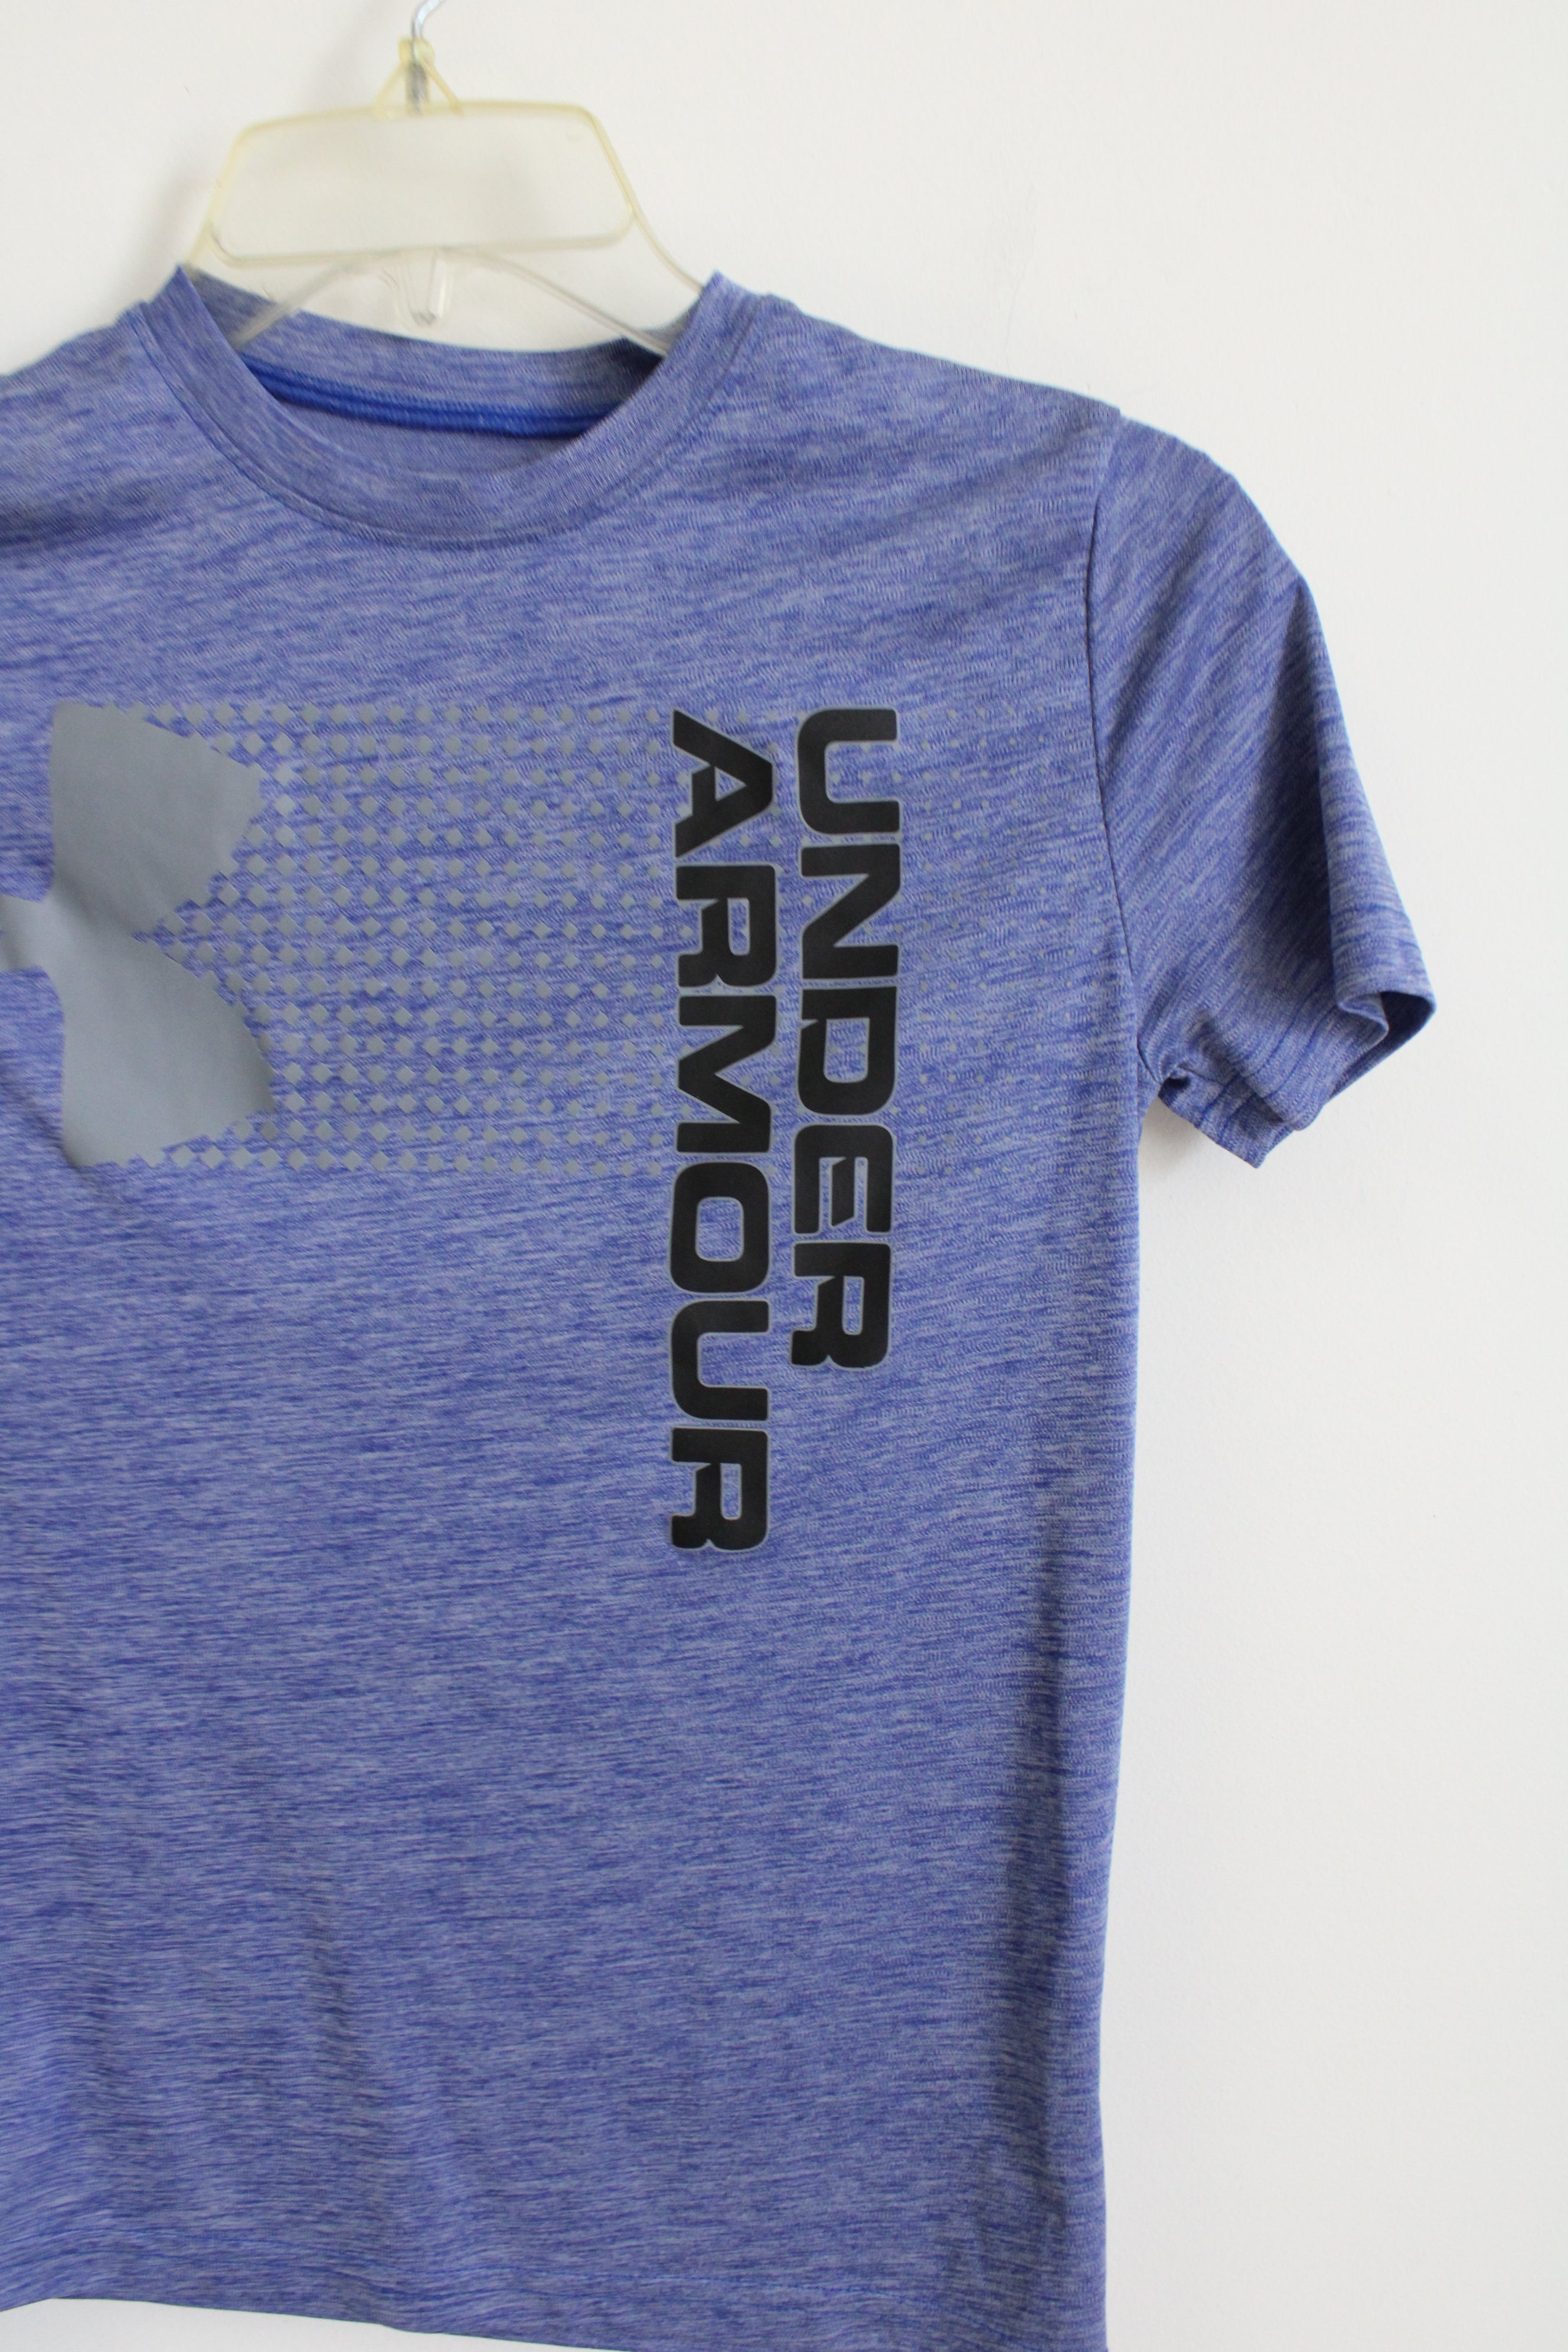 Under Armour Blue Logo Shirt | Youth M (10/12)